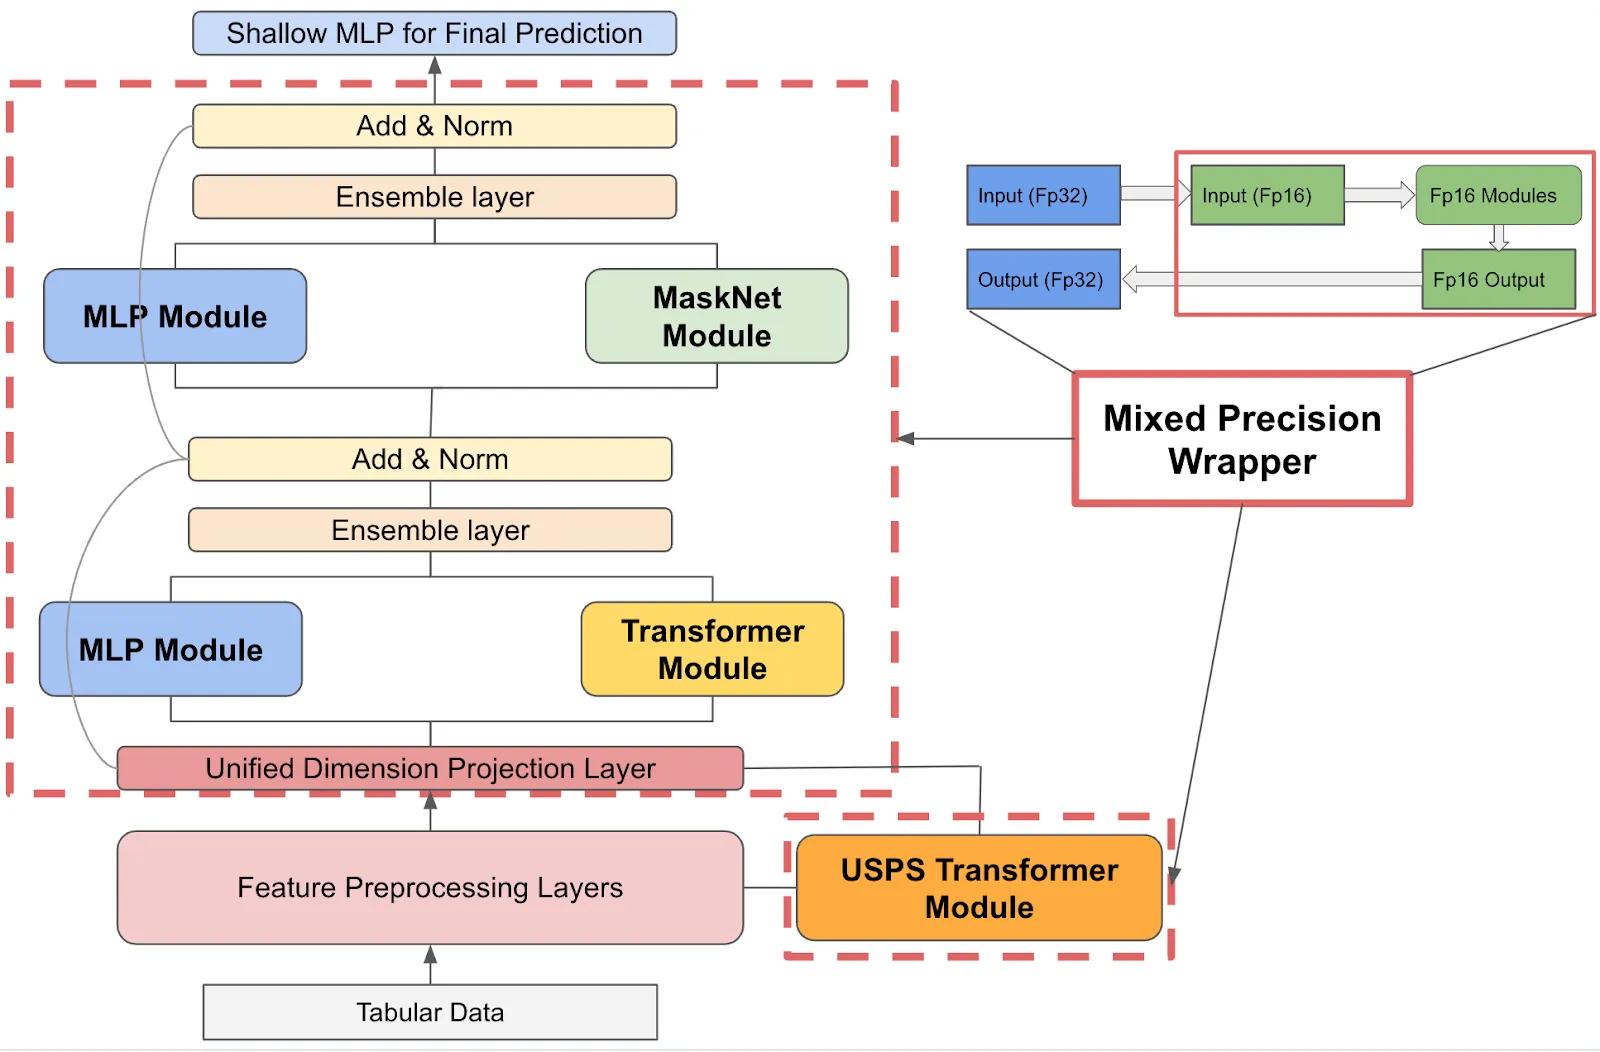 Integration of Mixed Precision Wrapper with the serving model artifact